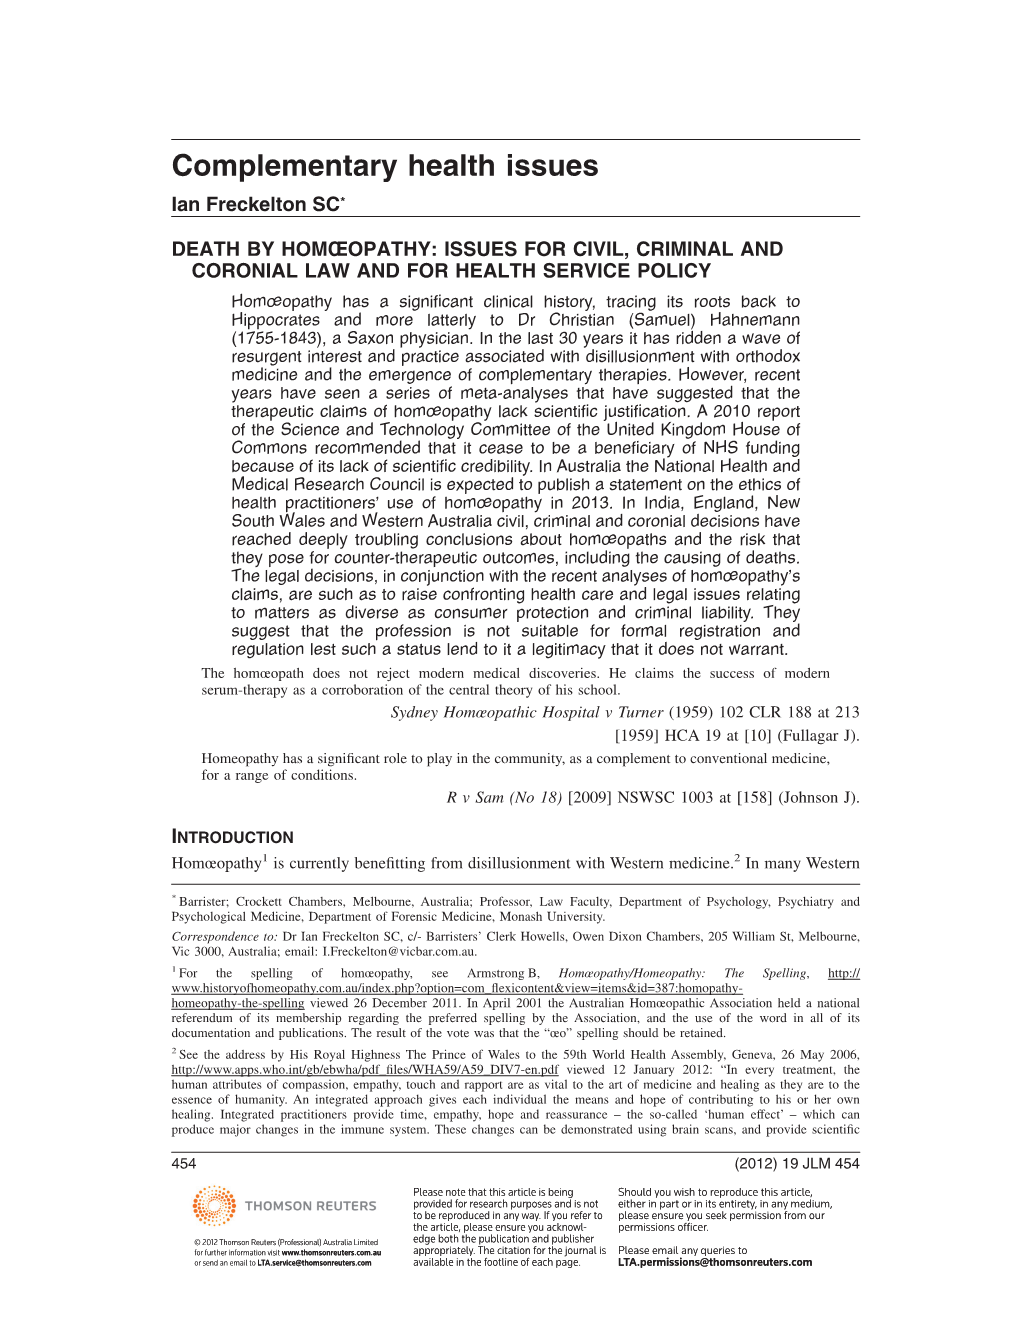 Complementary Health Issues Ian Freckelton SC*